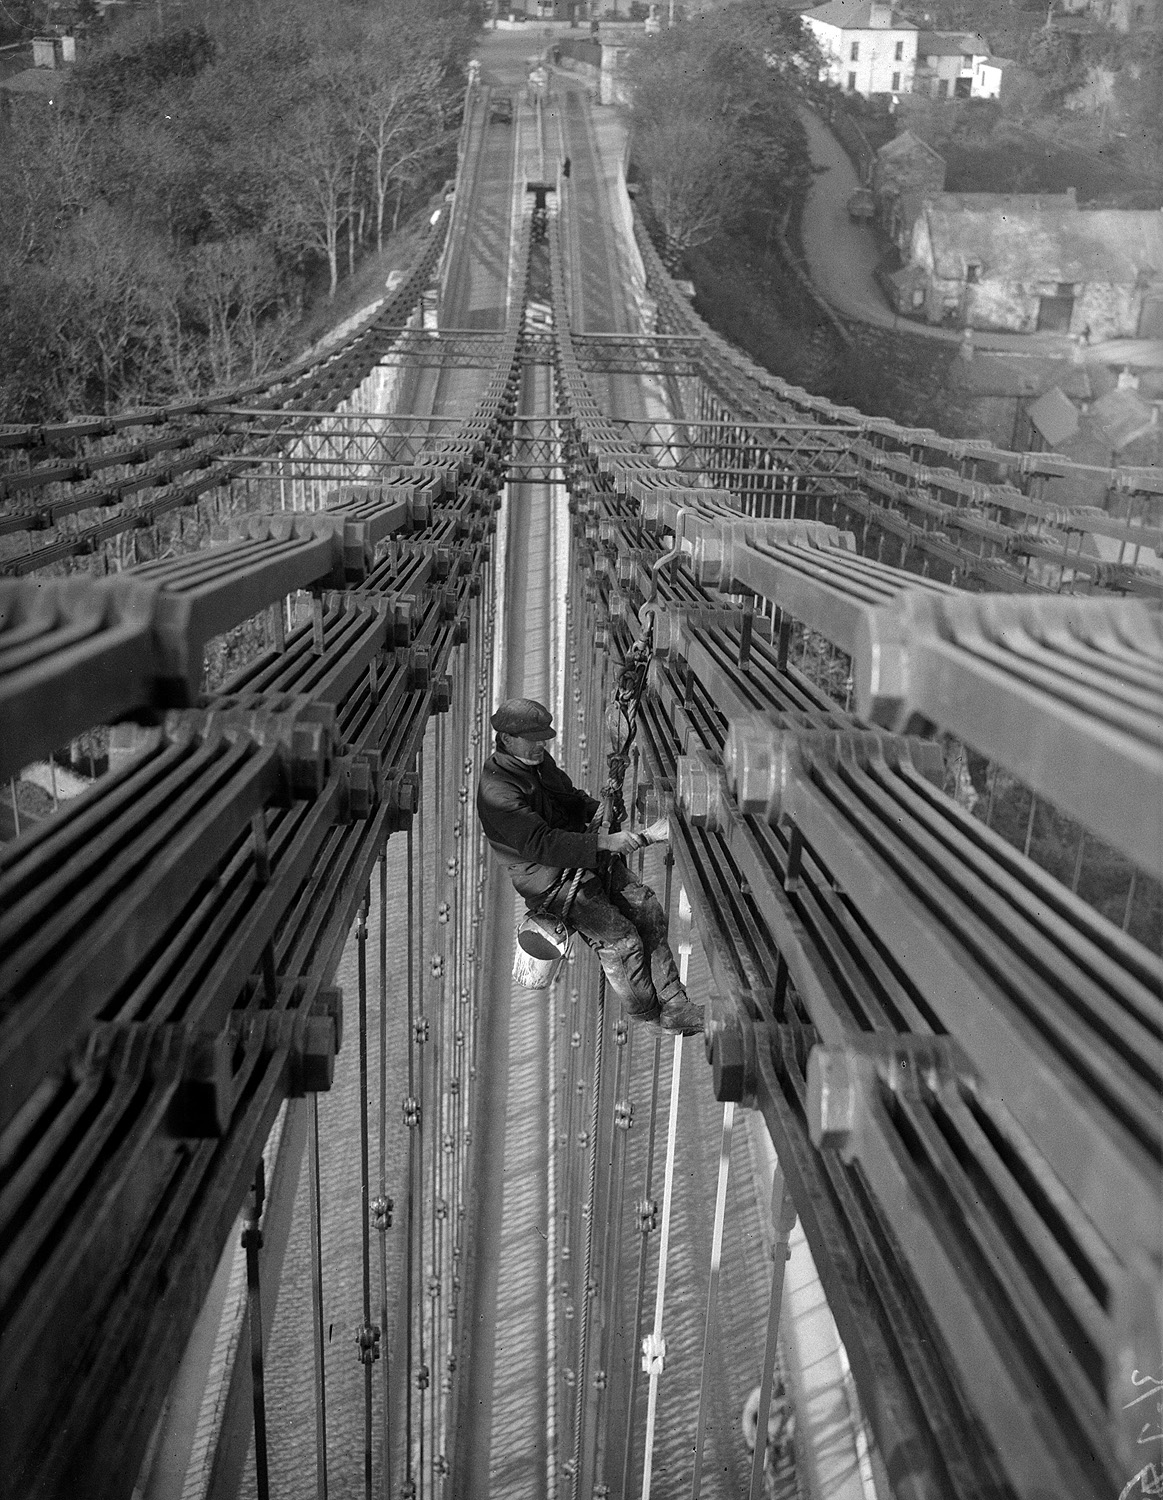 21 Views Of Workers Struggling With Megastructures